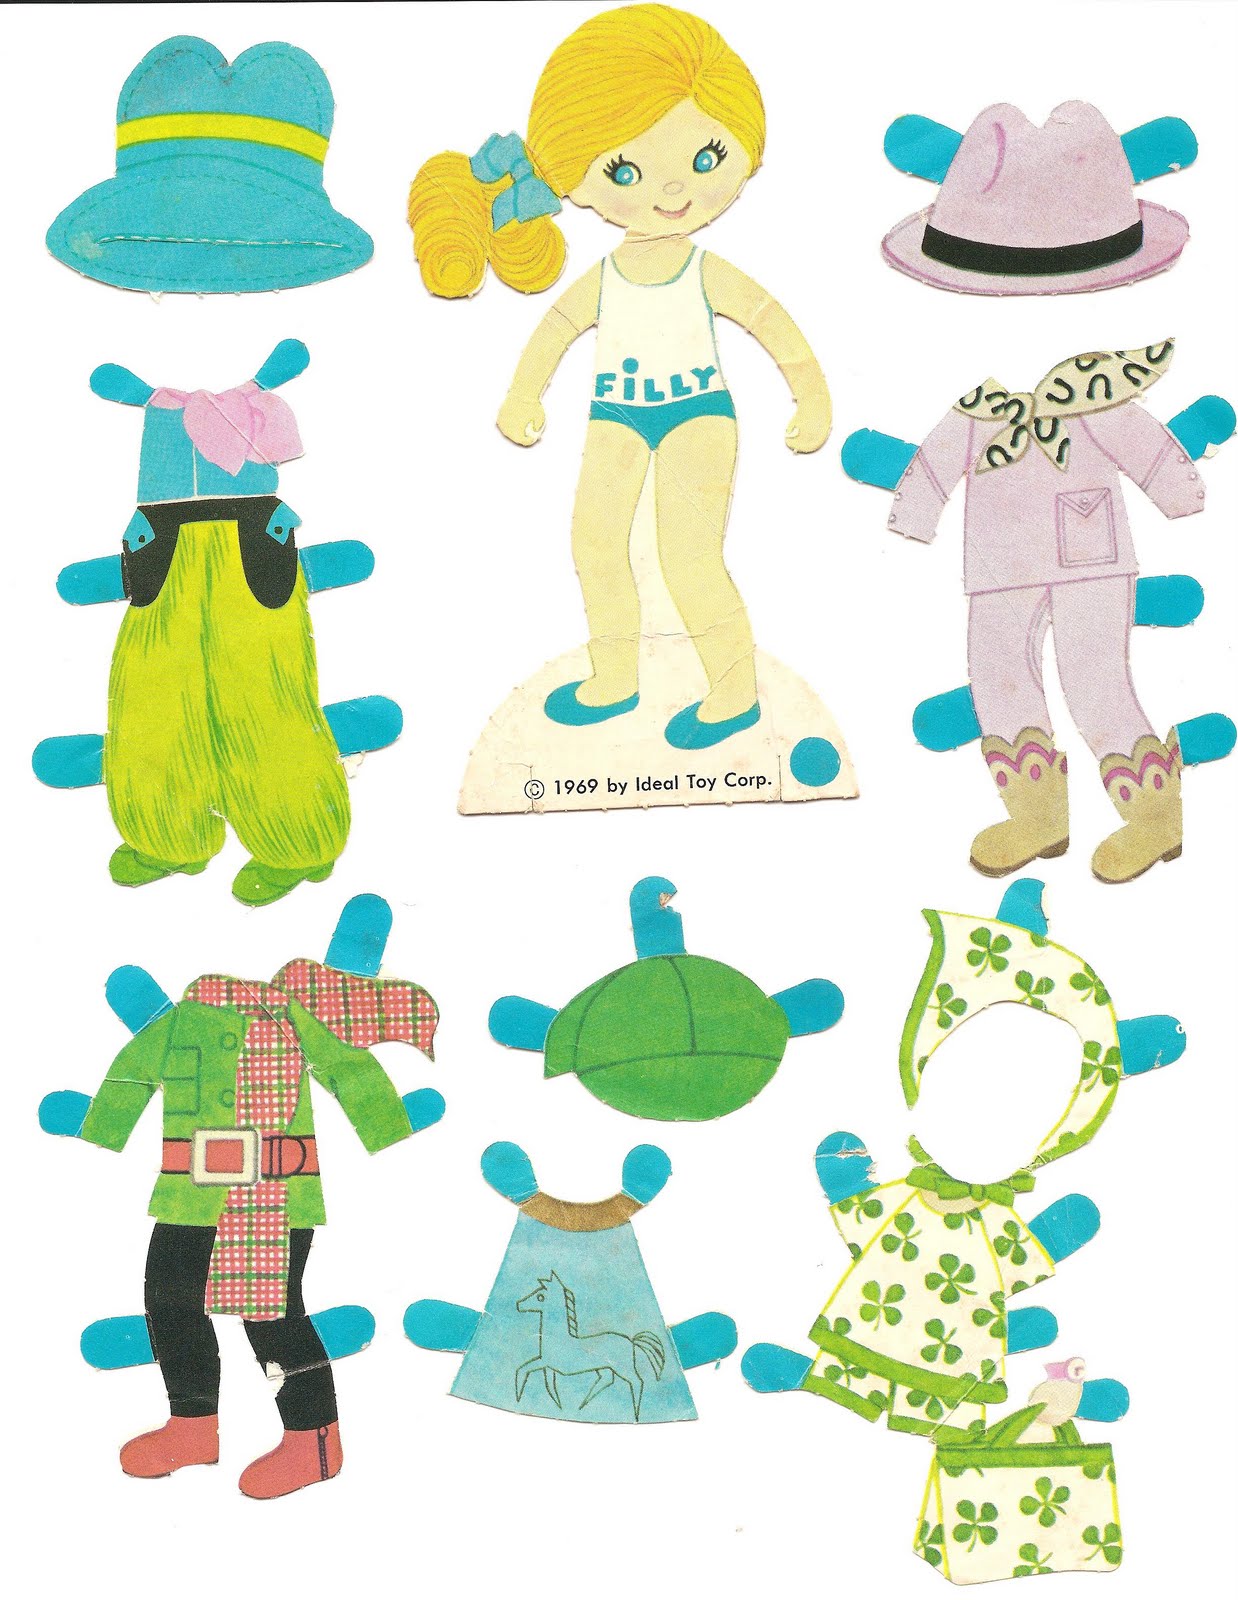 Mostly Paper Dolls: Flatsy Paper Dolls - FILLY